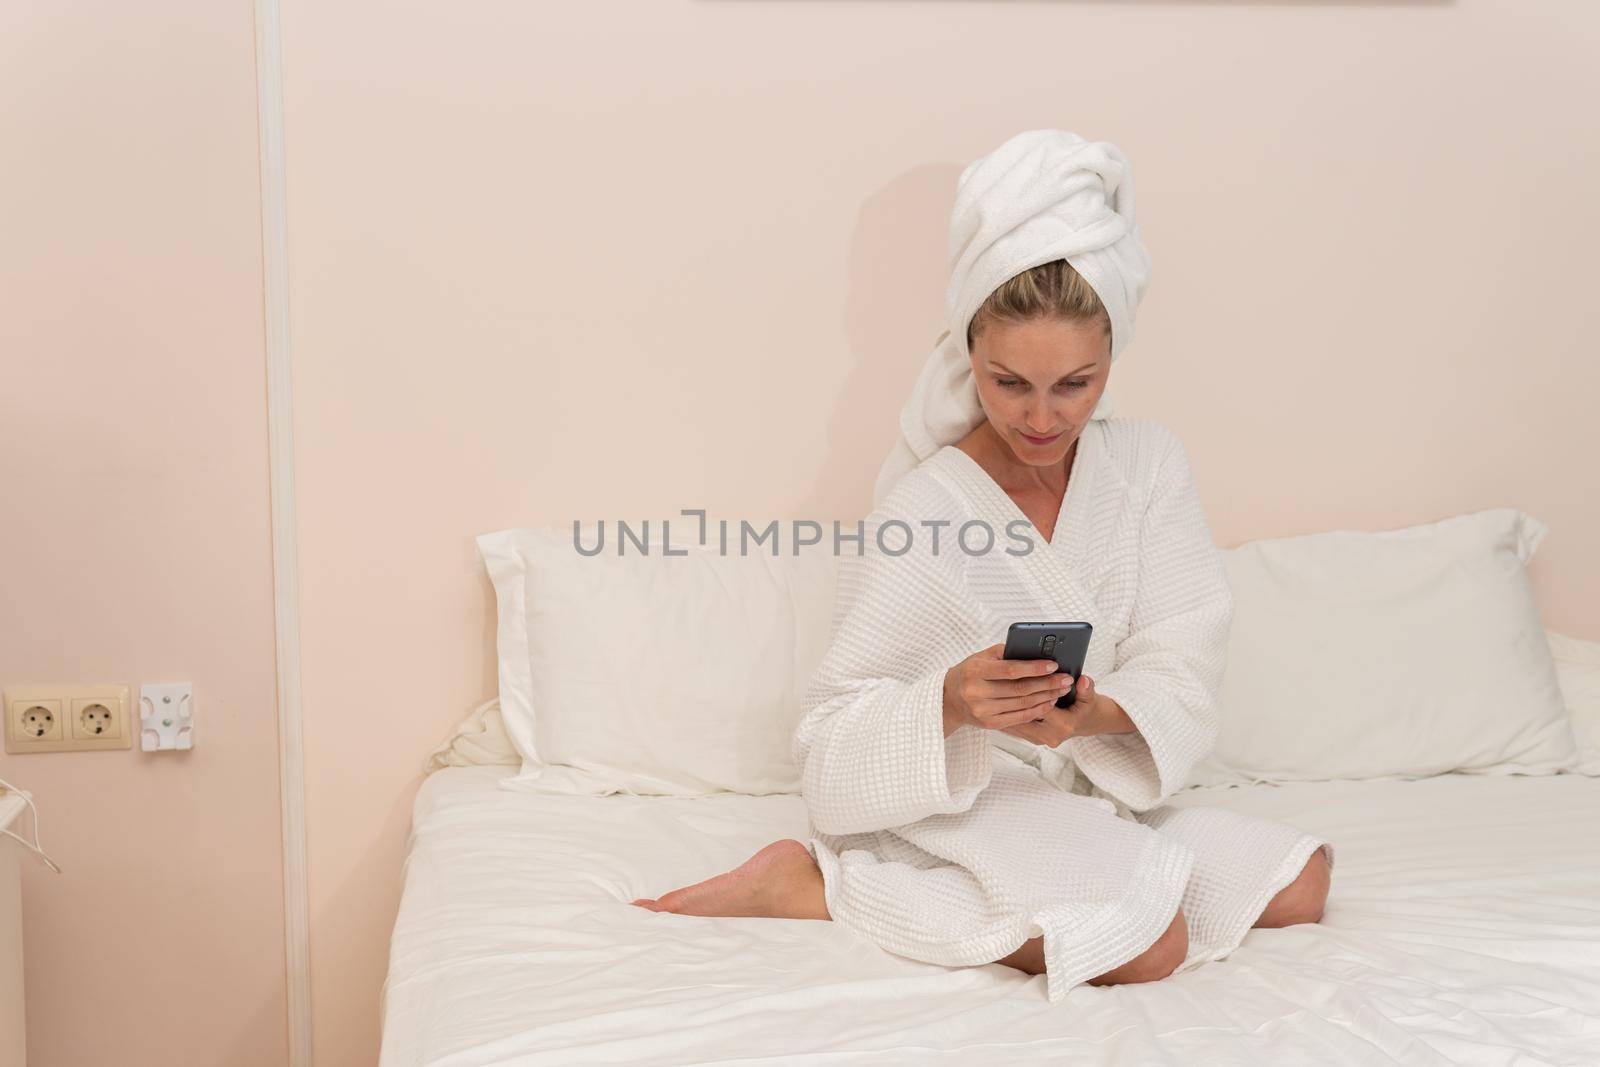 Cell spa bed female copyspace beauty bathrobe care bathroom untying, from unrecognizable modern from wellness and beautiful relaxation, robe concept. Interior therapy american, by 89167702191